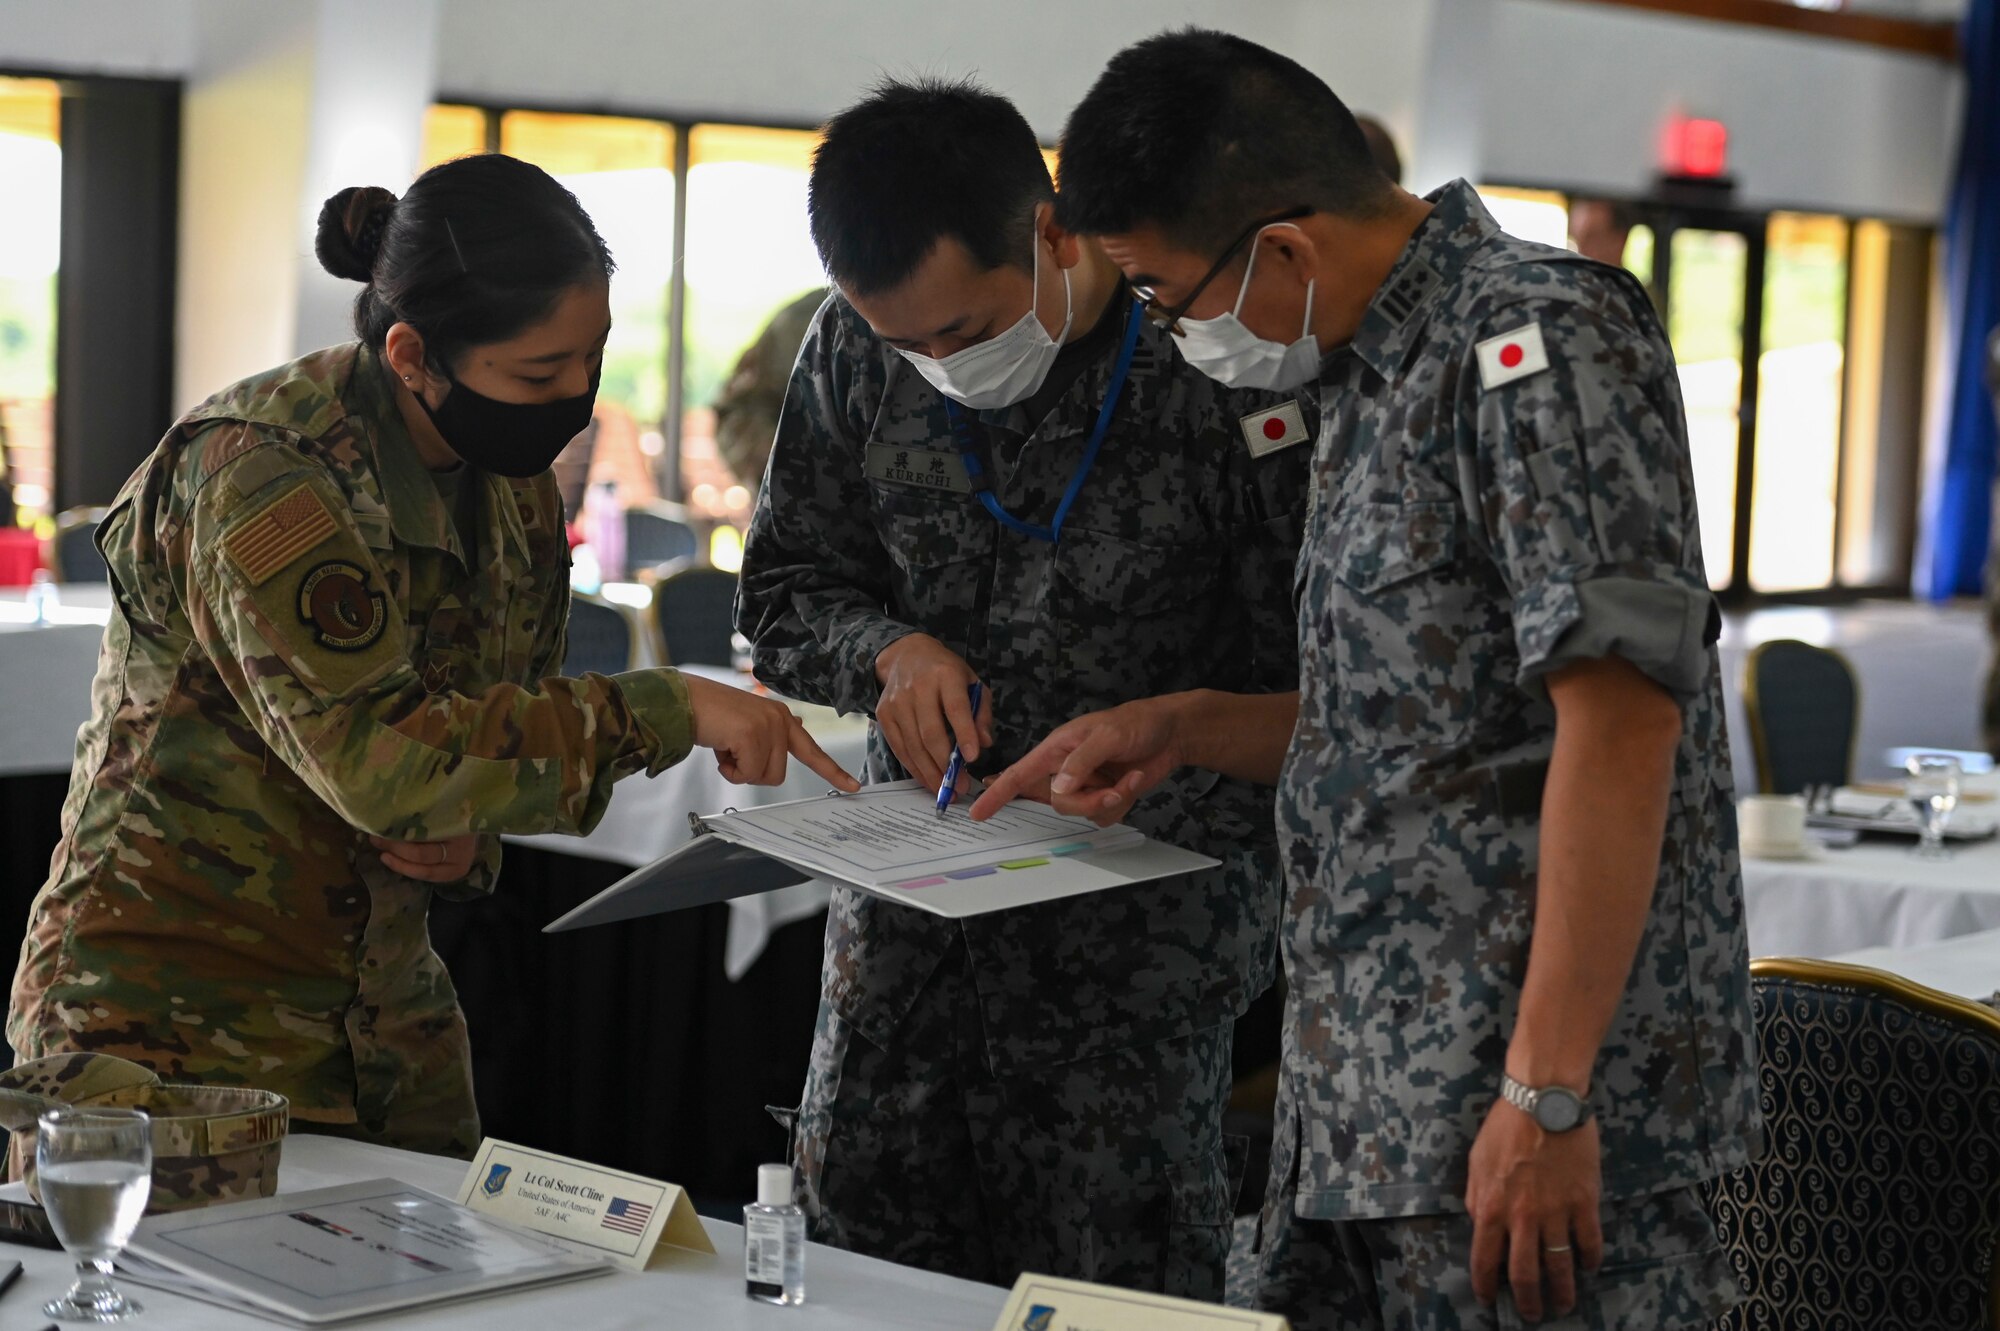 TSgt Kanako Fromm, a U.S. Air Force Language Enabled Airman assigned to the 374th Wing, helps interpret material with members of the Japan Air Self-Defense Force during the Pacific Unity Multi-Lateral Civil Engineer Key Leader Engagement, June 22, 2022 at Andersen Air Force Base, Guam. Themes during this KLE included topics of shared interest across the allies and partners such as joint capabilities, leveraging expertise in the Total Force, and increased frequency of subject matter expert exchanges and multi-lateral training. (U.S. Air Force Photo by Airman 1st Class Emily Saxton)